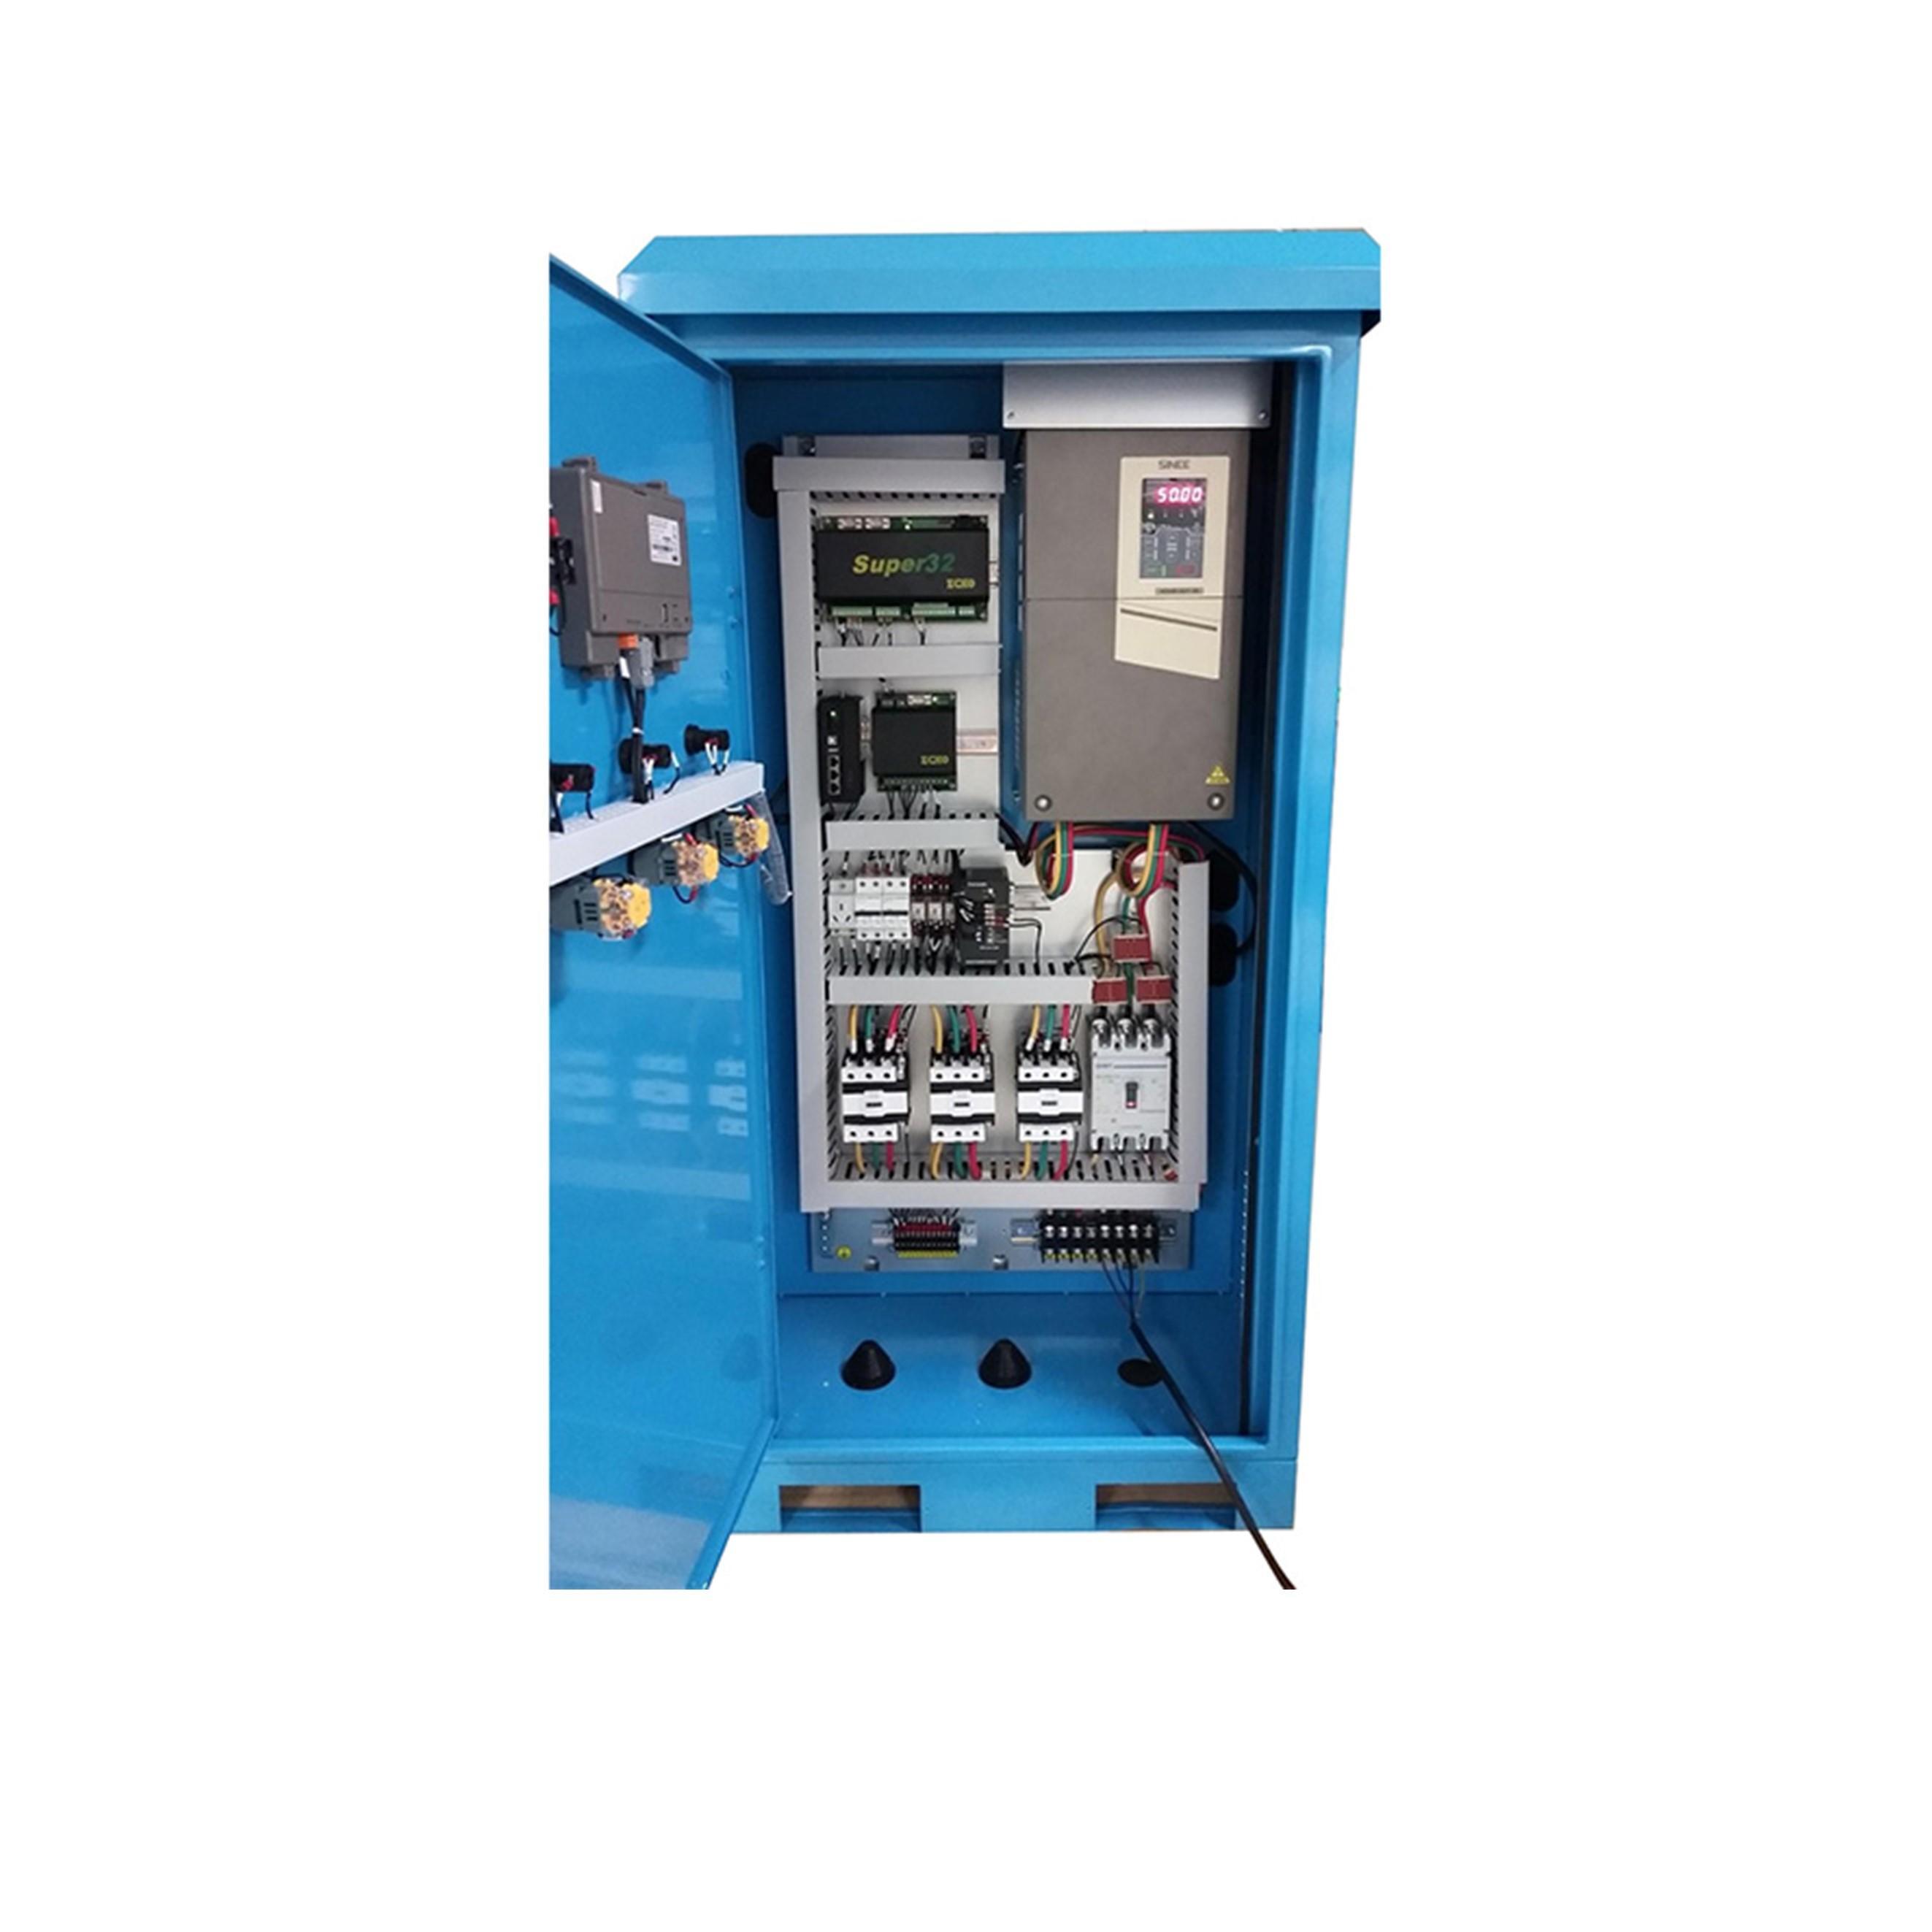 VFD for oil pumping